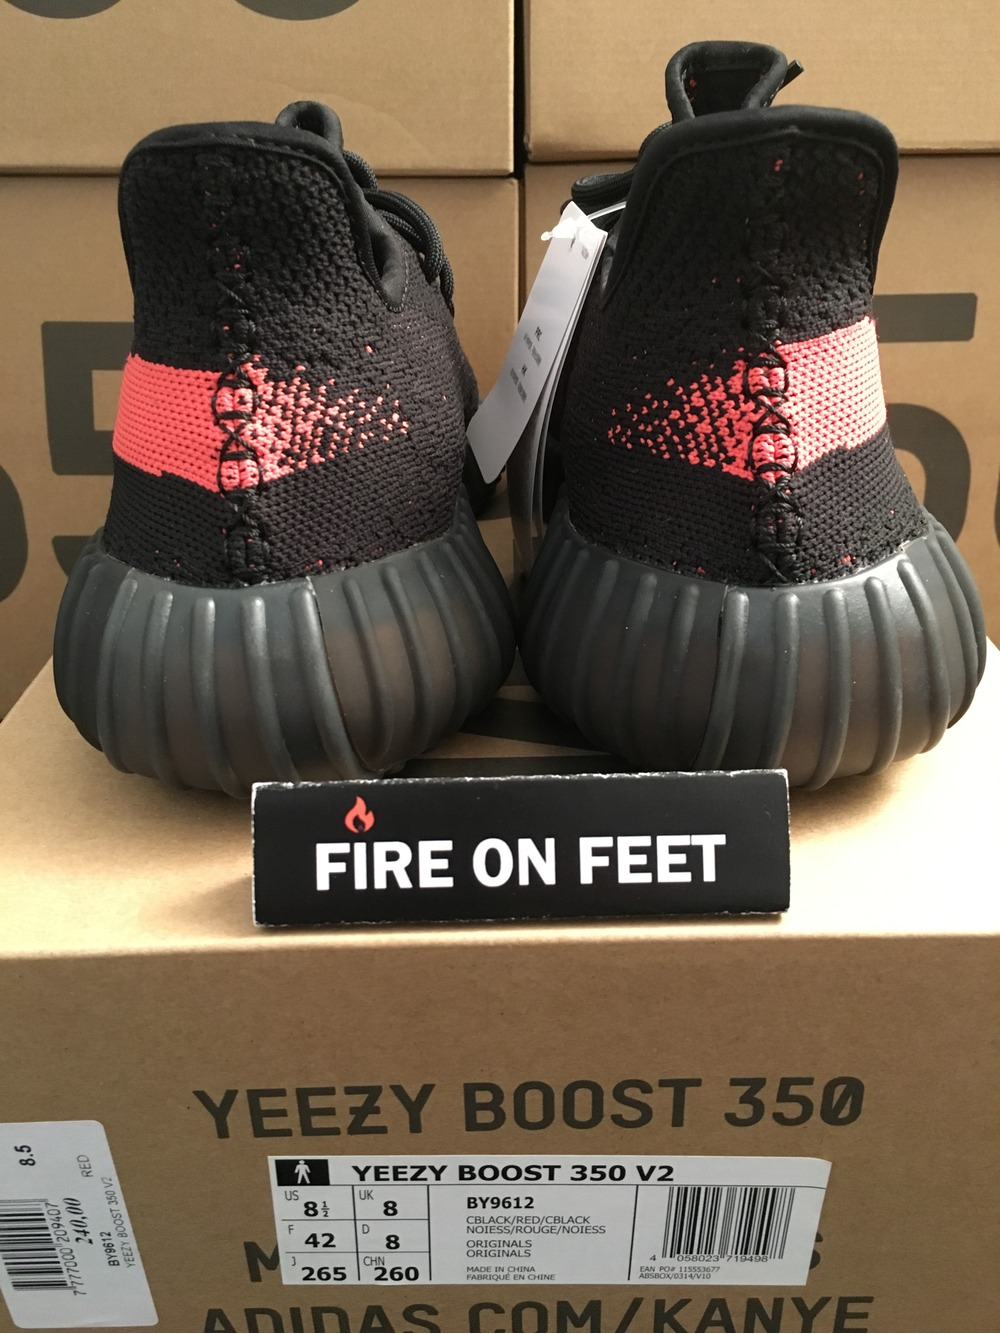 Kanye West Yeezy boost 350 V2 black red release date uk Cyber